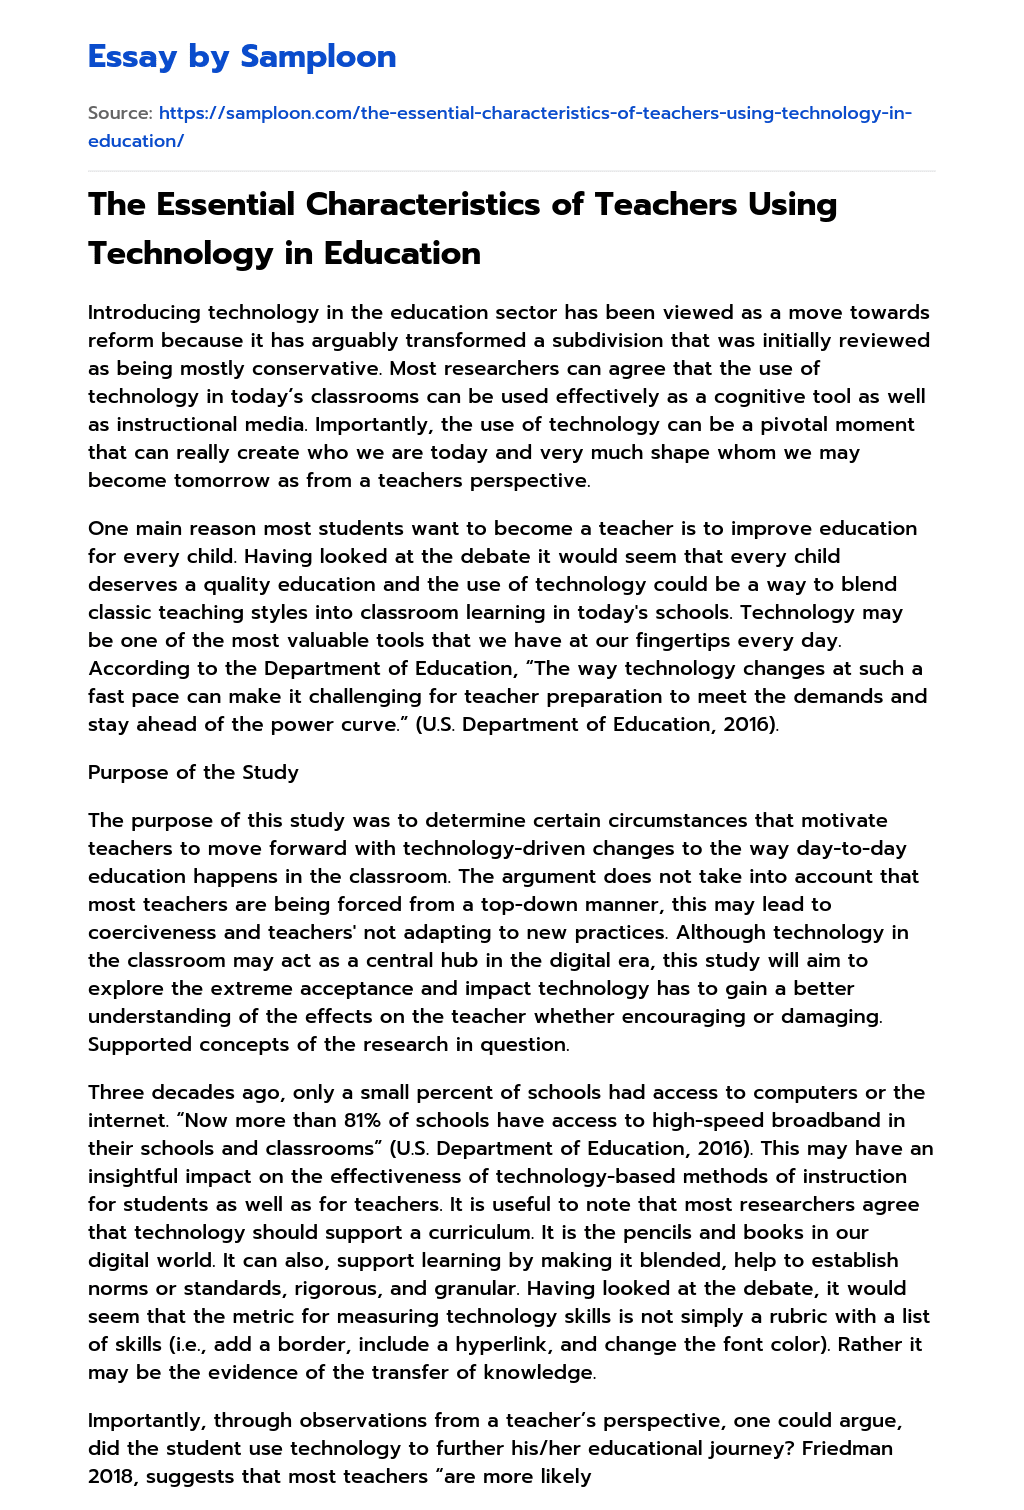 The Essential Characteristics of Teachers Using Technology in Education essay